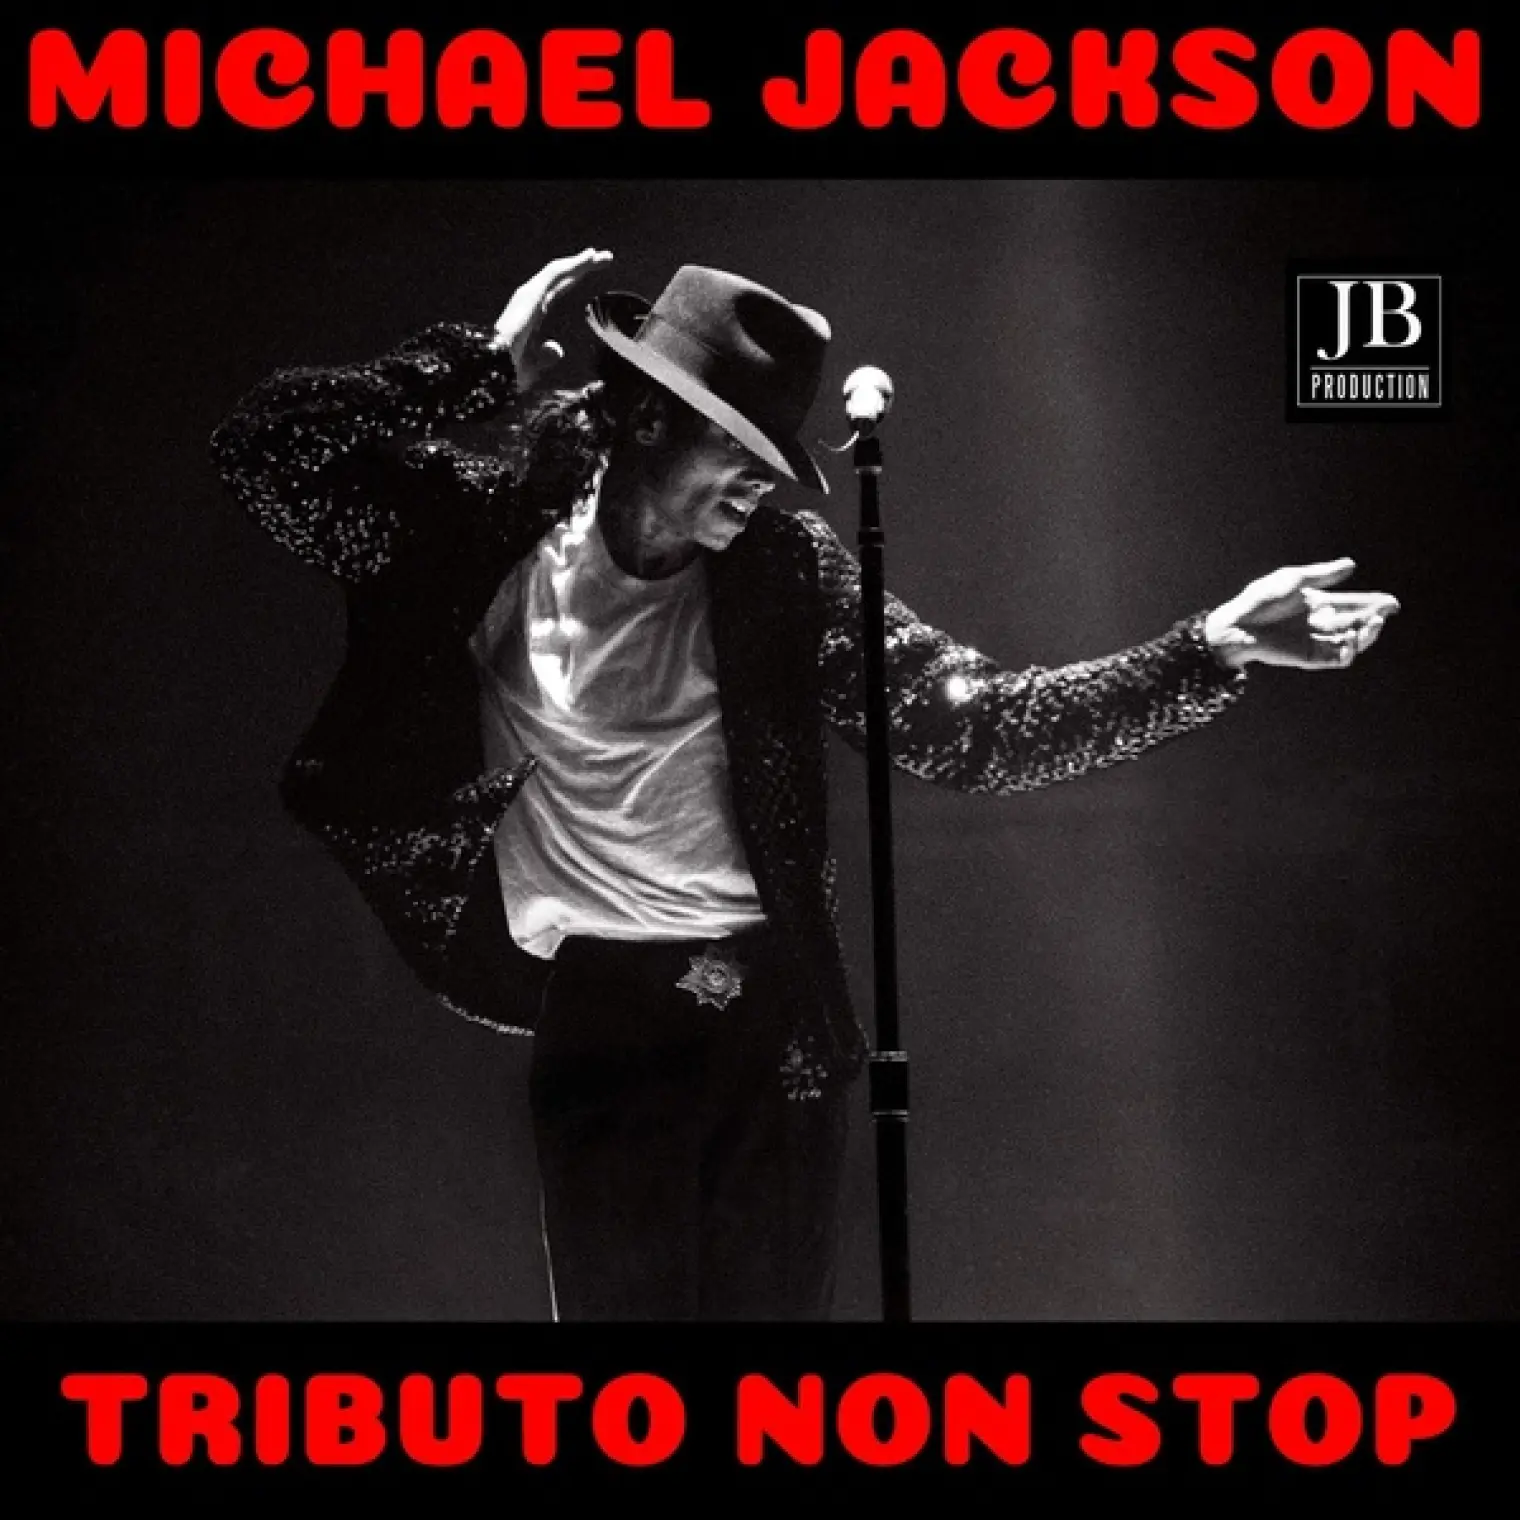 Michael Jackson Tribute Medley: Human Nature / Black or White / You're Not Alone / Another Part of Me / Liberian Girl / Heal the World / Remember the Time / I Just Can't Stop Loving You / Thriller / Bad / Beat It / Billie Jean / We Are the World -  Silver 